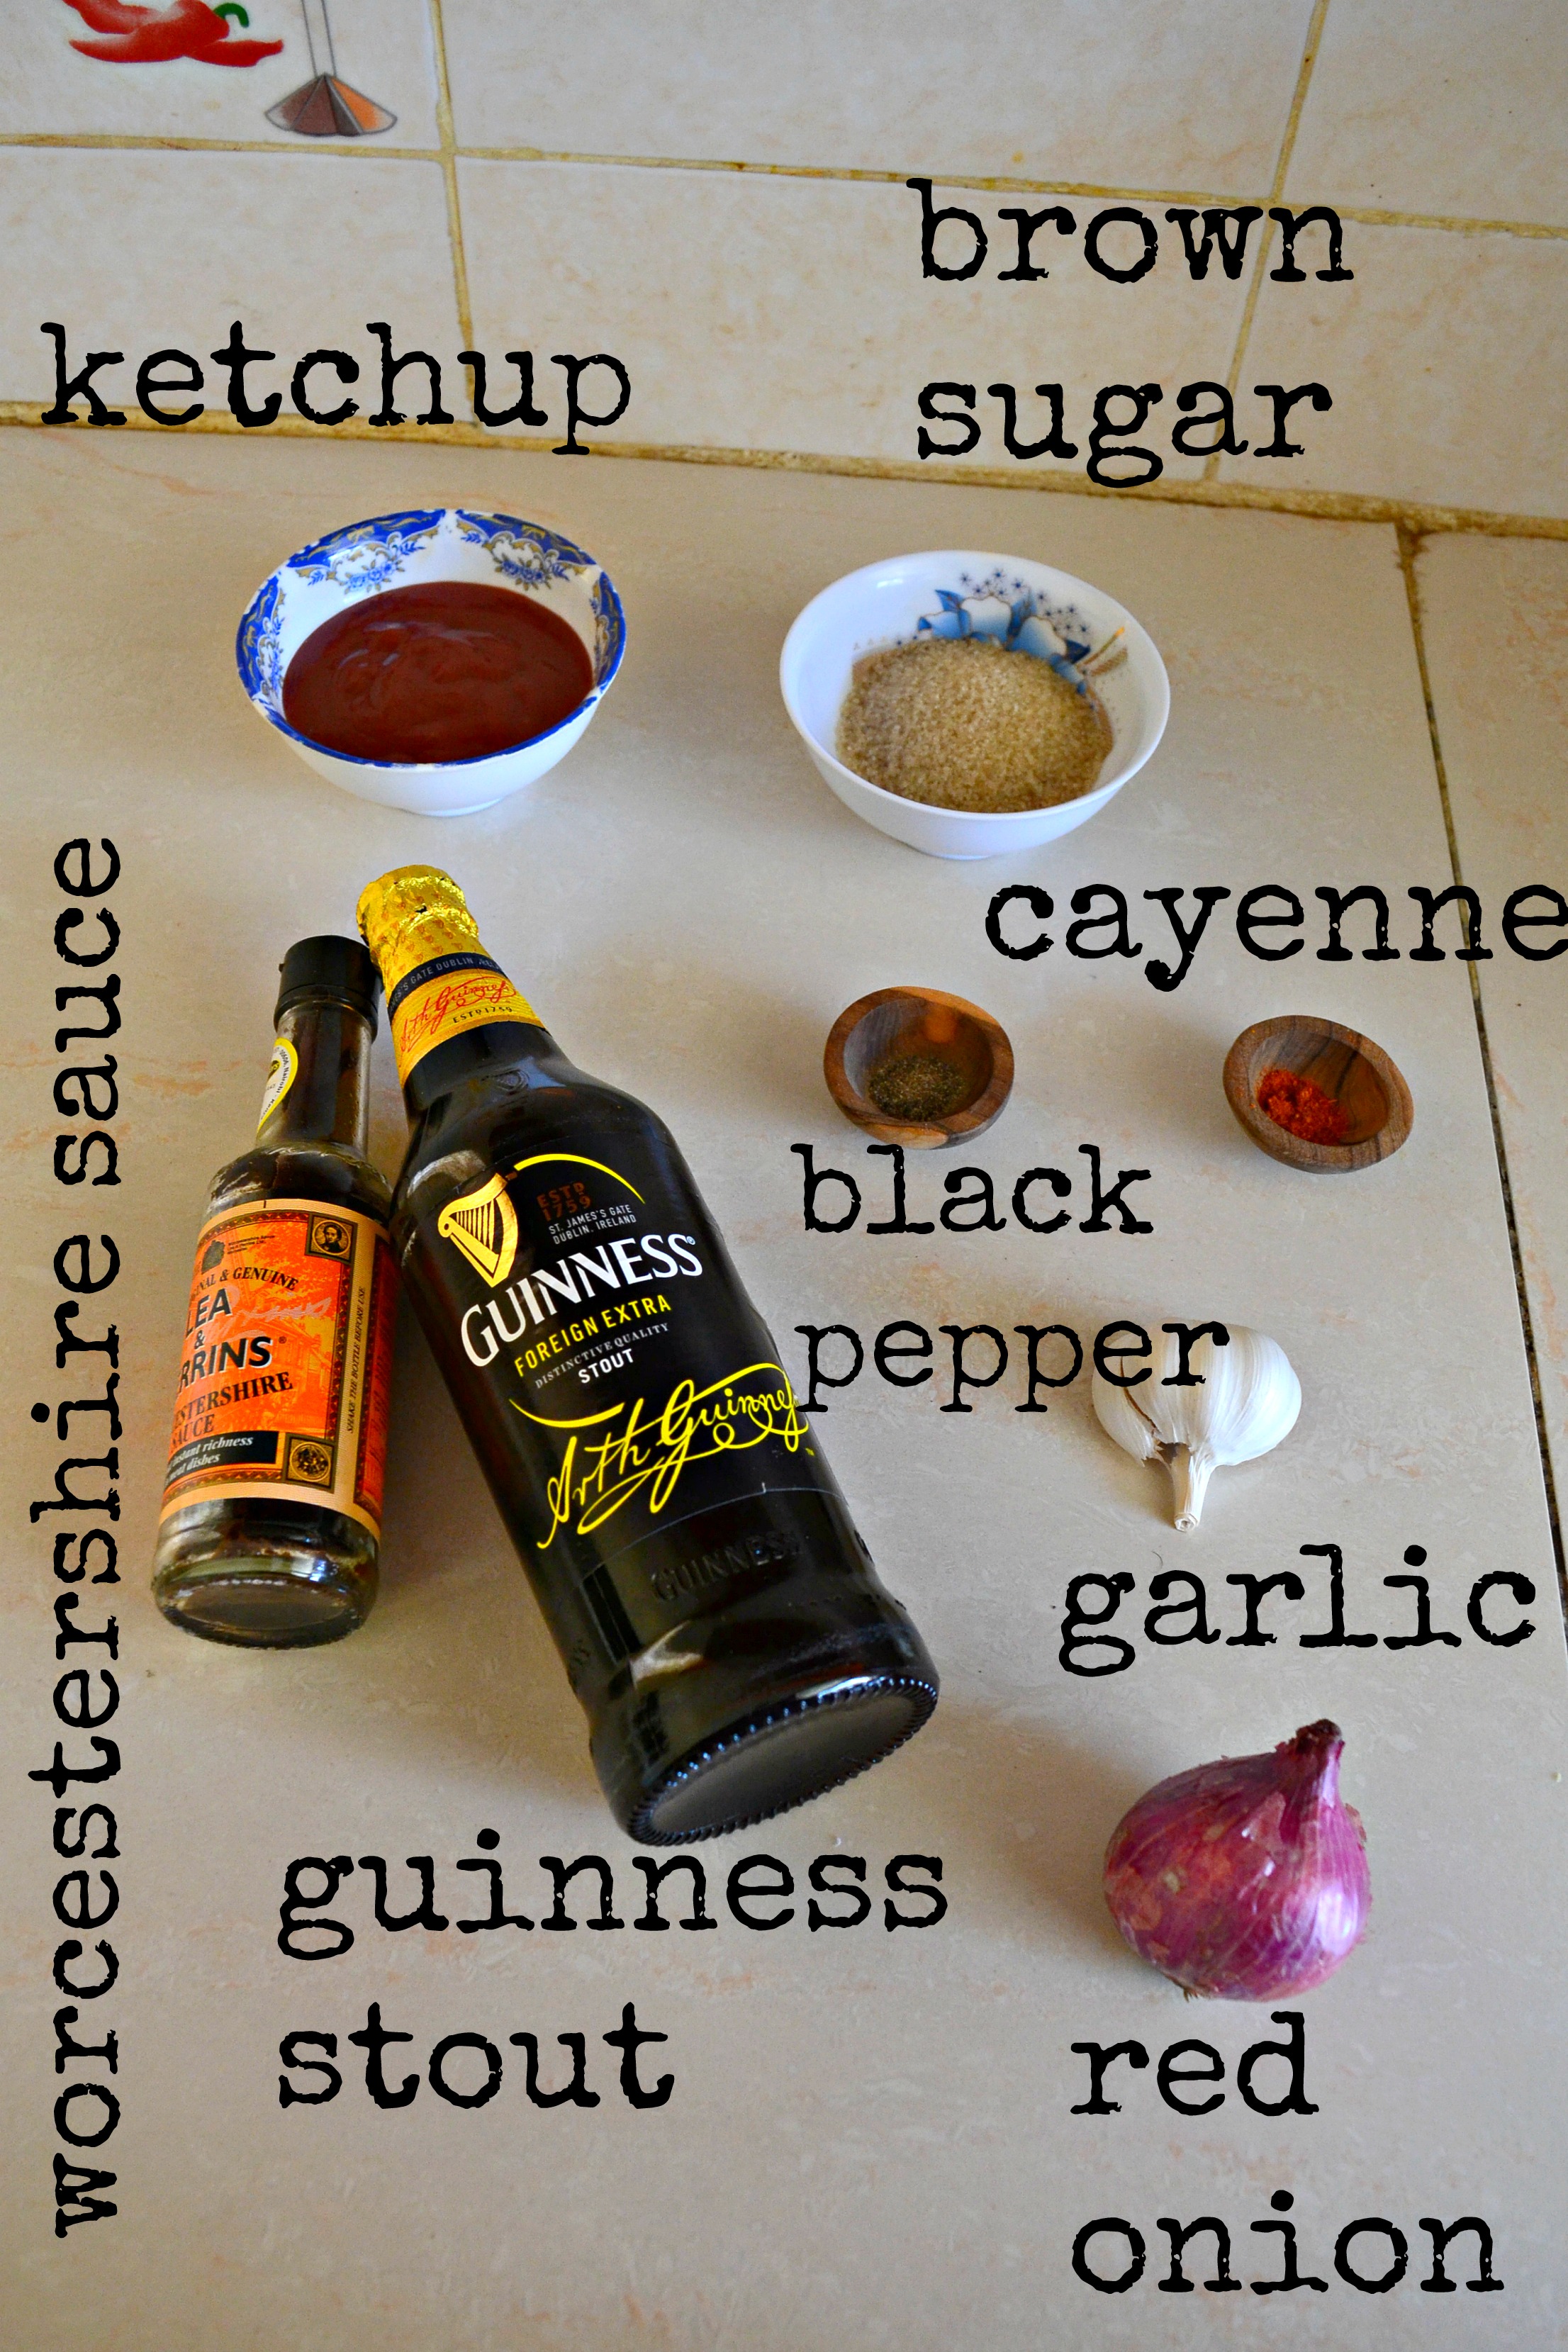 how-to-make-bbq-sauce-with-beer_garlic-stout-bbq-sauce-by-kaluhi-adagala-of-kaluhiskitchen-com_guinness-recipes